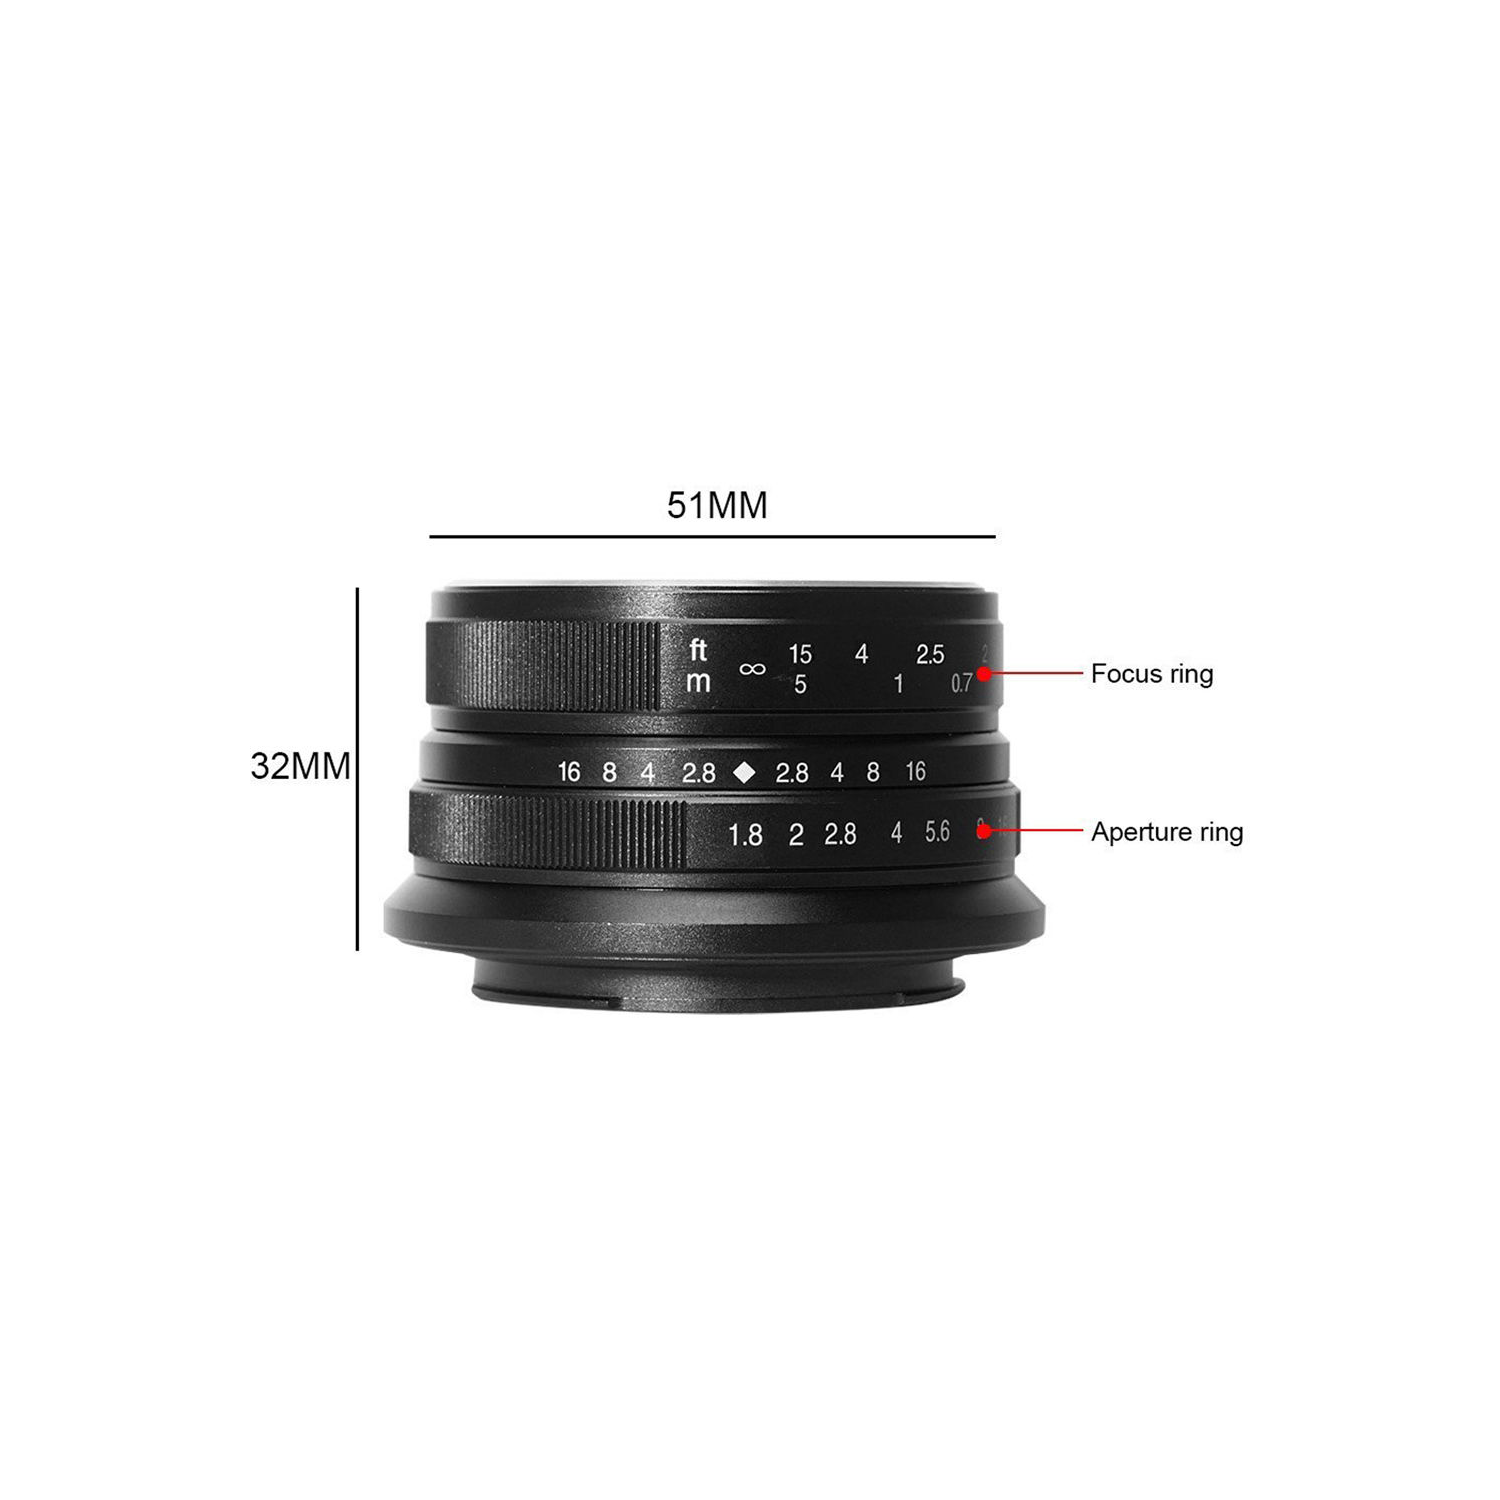 7artisans Photoelectric 25mm f/1.8 Lens for Micro Four Thirds